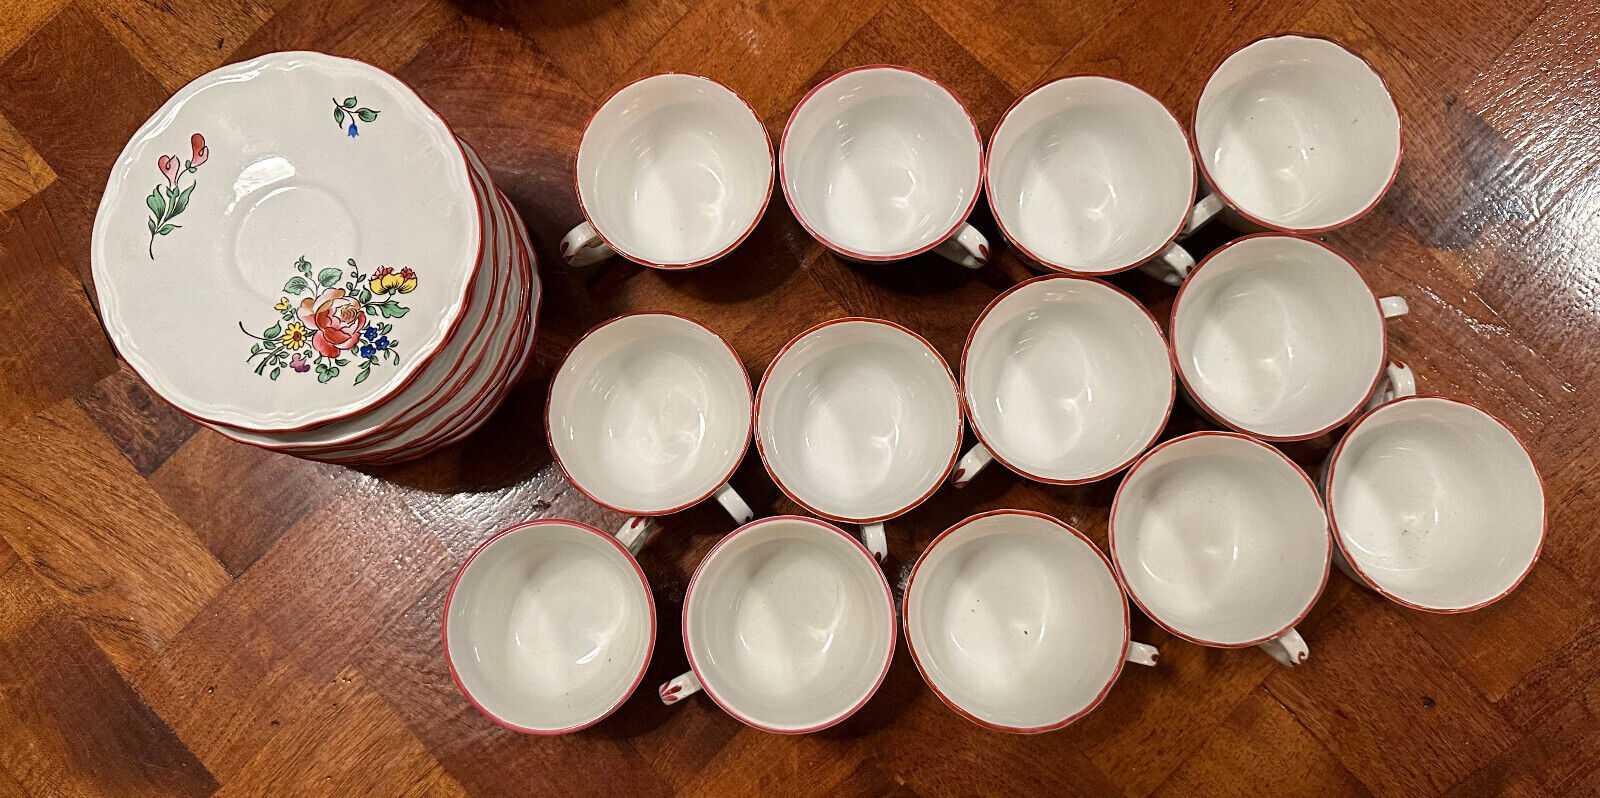 A Set of 12 Luneville (K and G) Demi-tasse cups and Saucers in unused condition